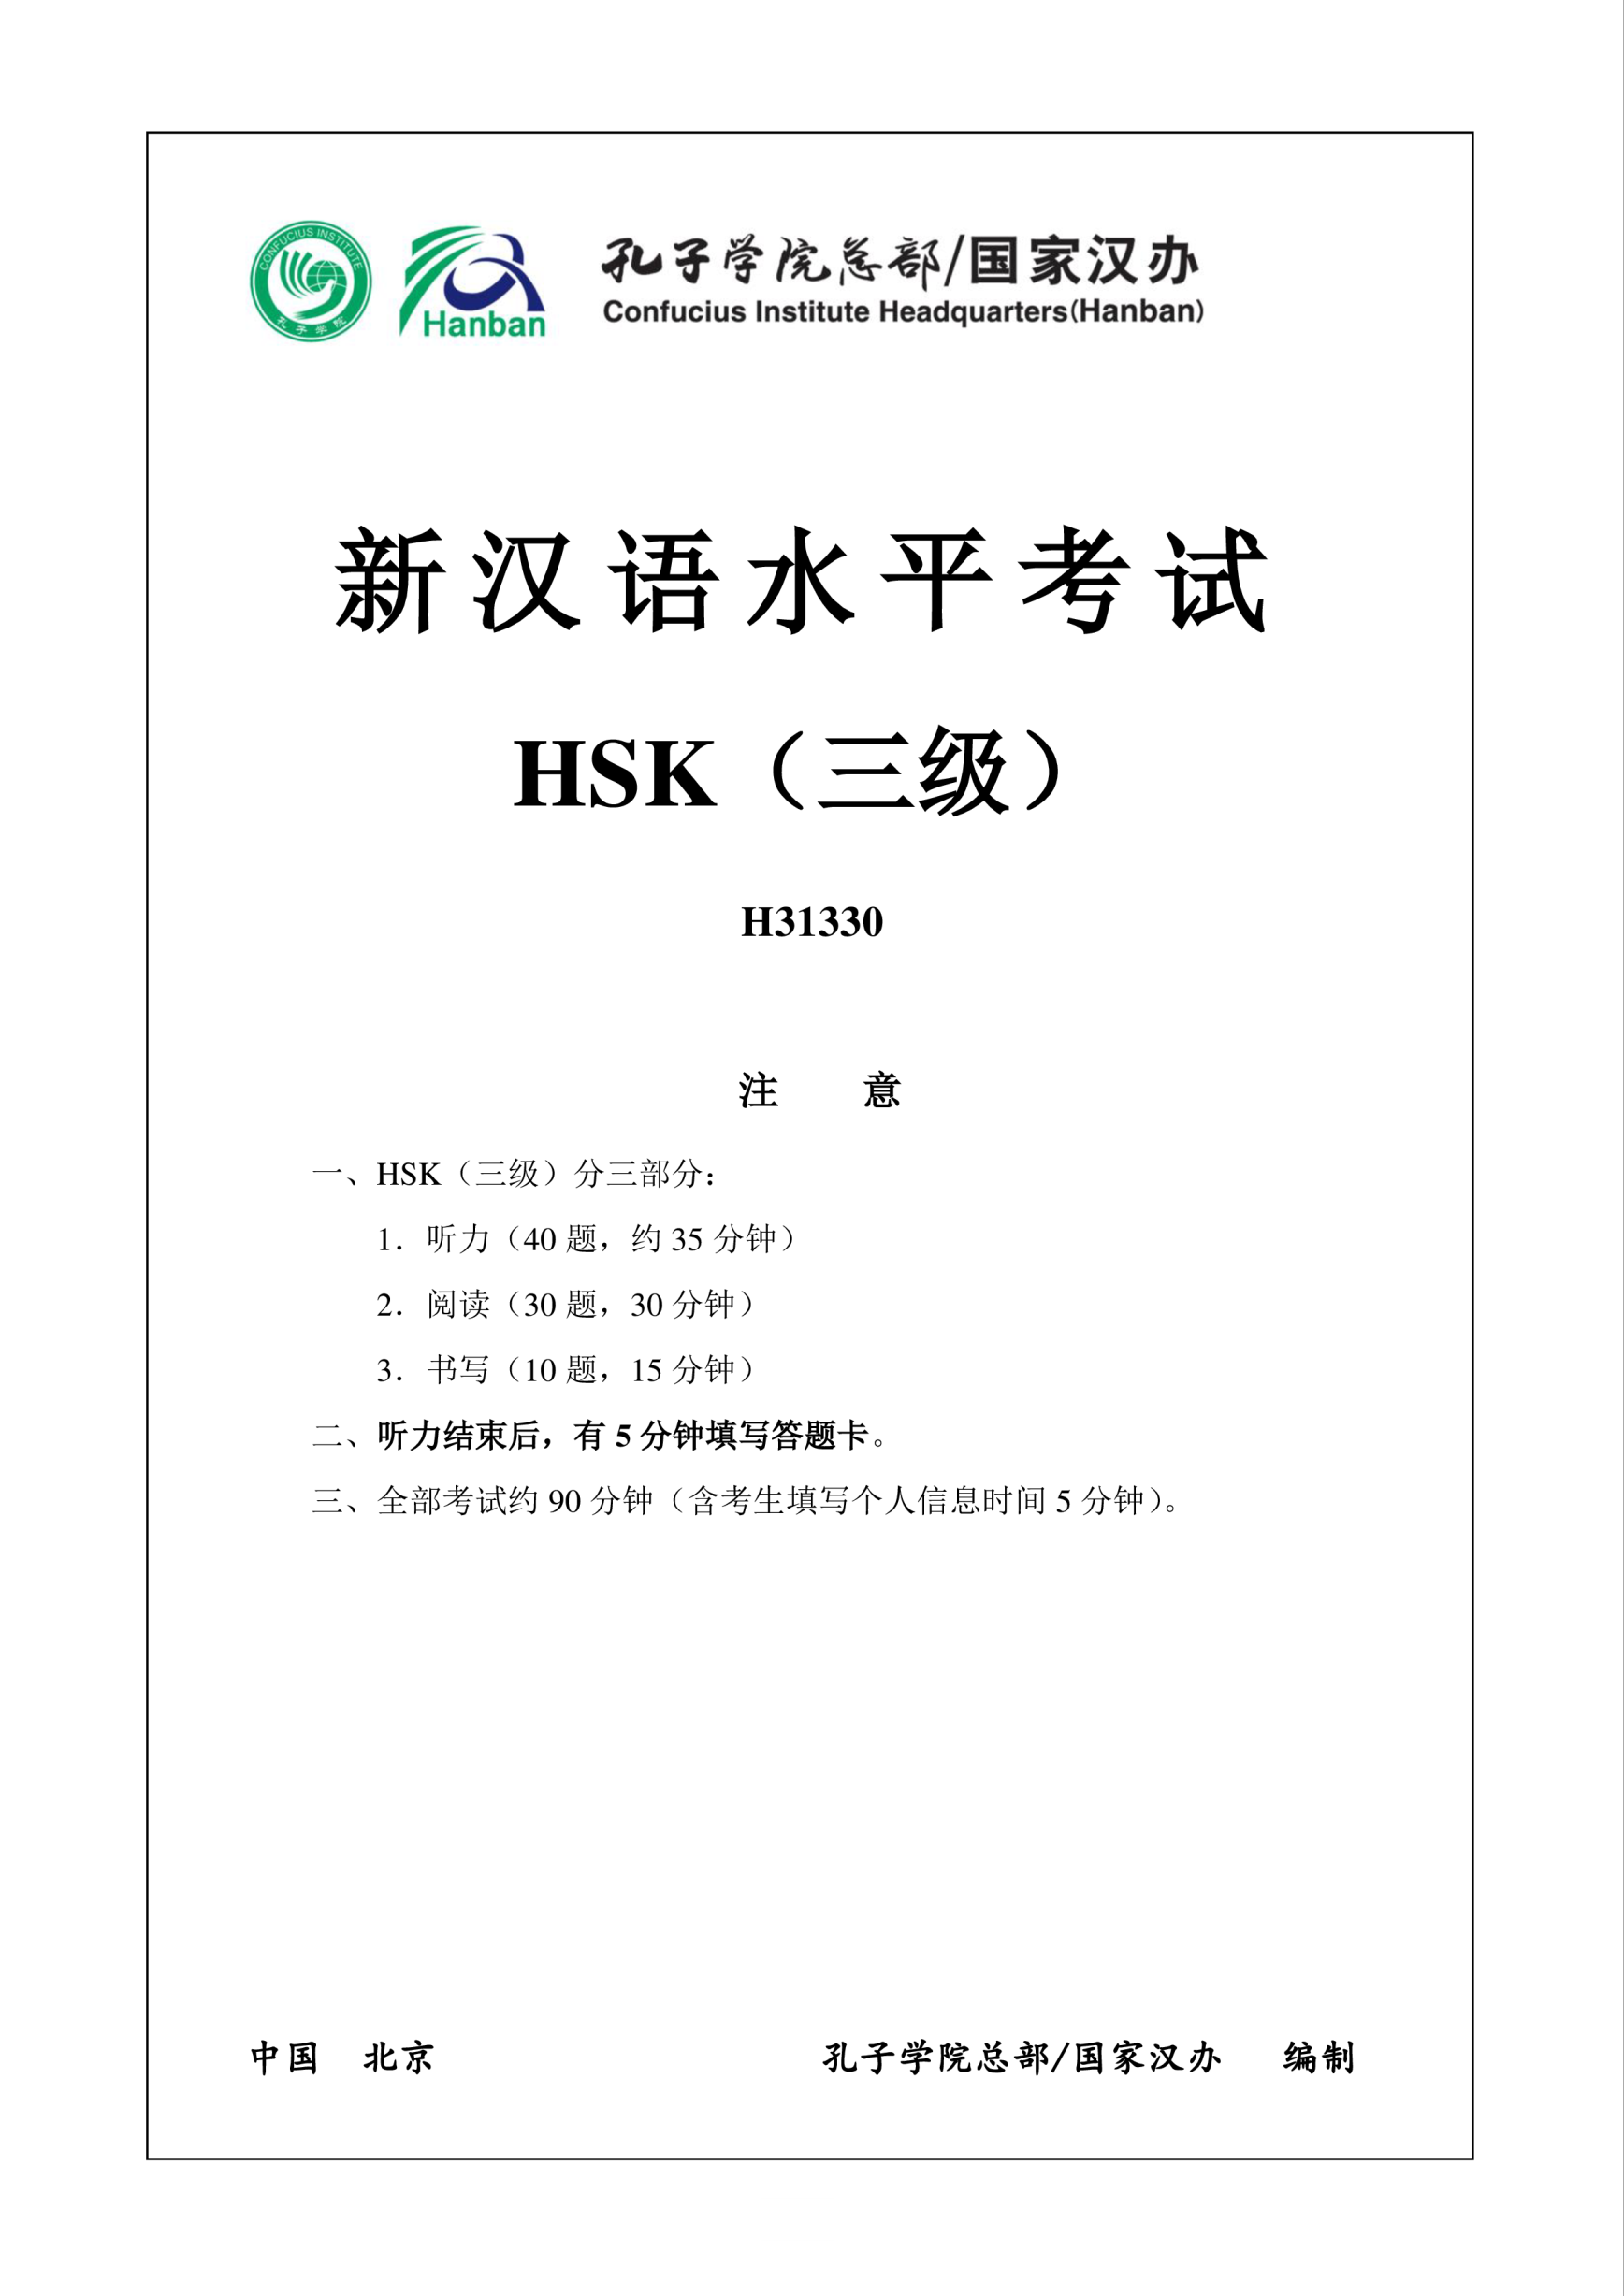 template preview imageHSK3 Chinese Exam including Answers # HSK3 H31330